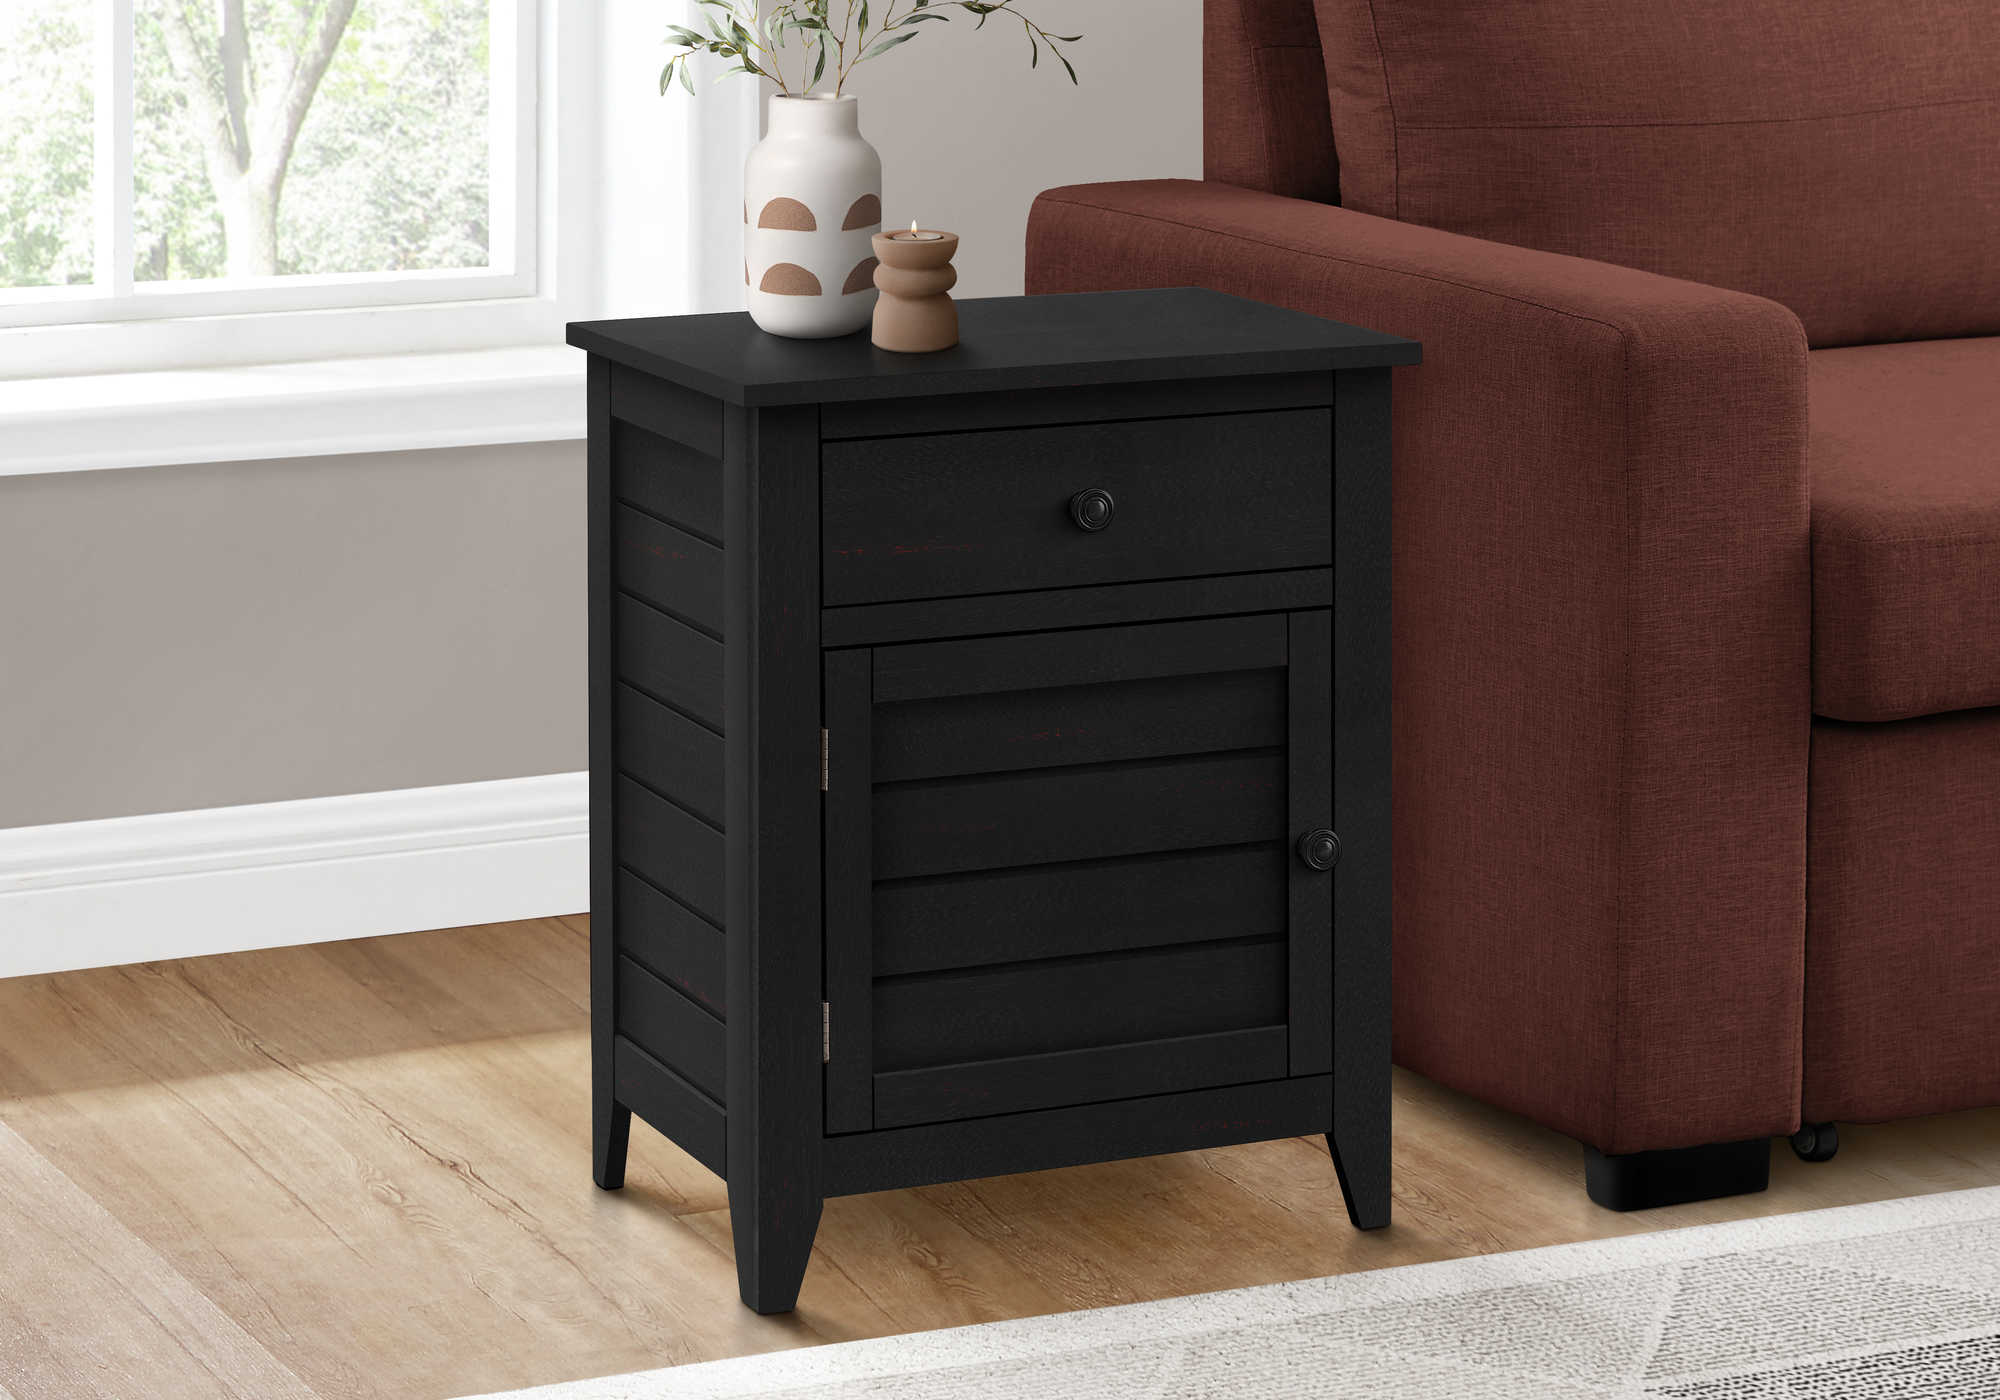 ACCENT TABLE - 25"H / BLACK VENEER END TABLE